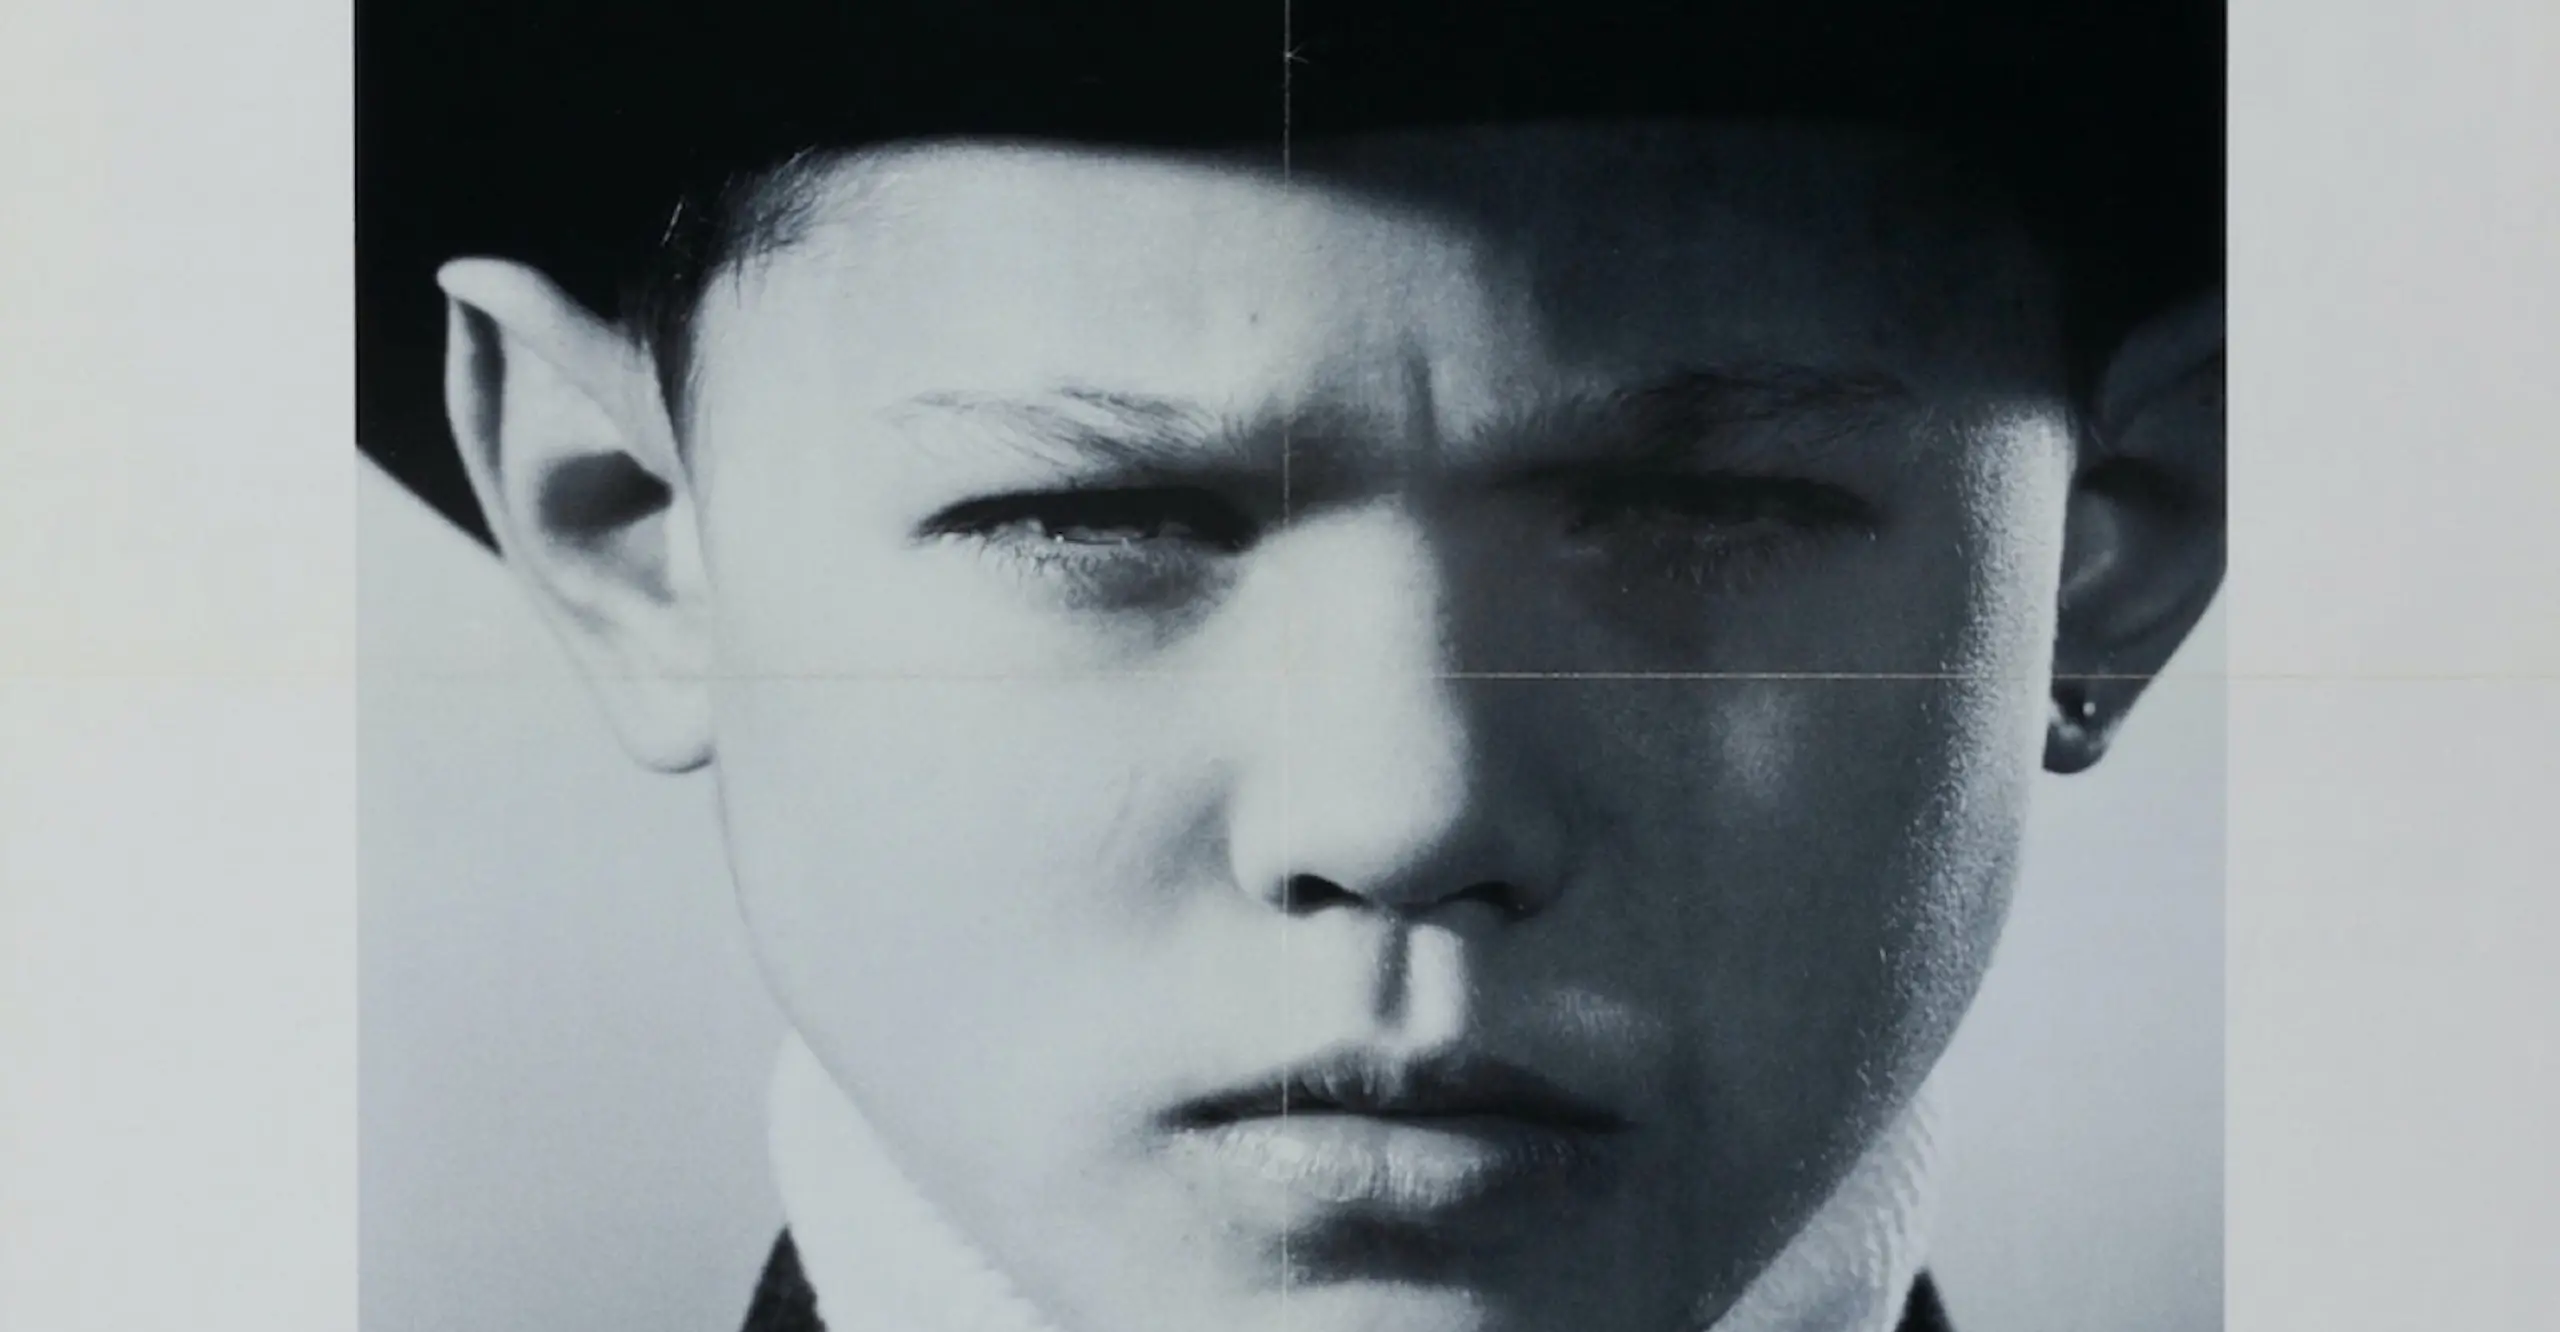 Archival poster featuring a child in black and white wearing a black hat with various typeface above and below the visage